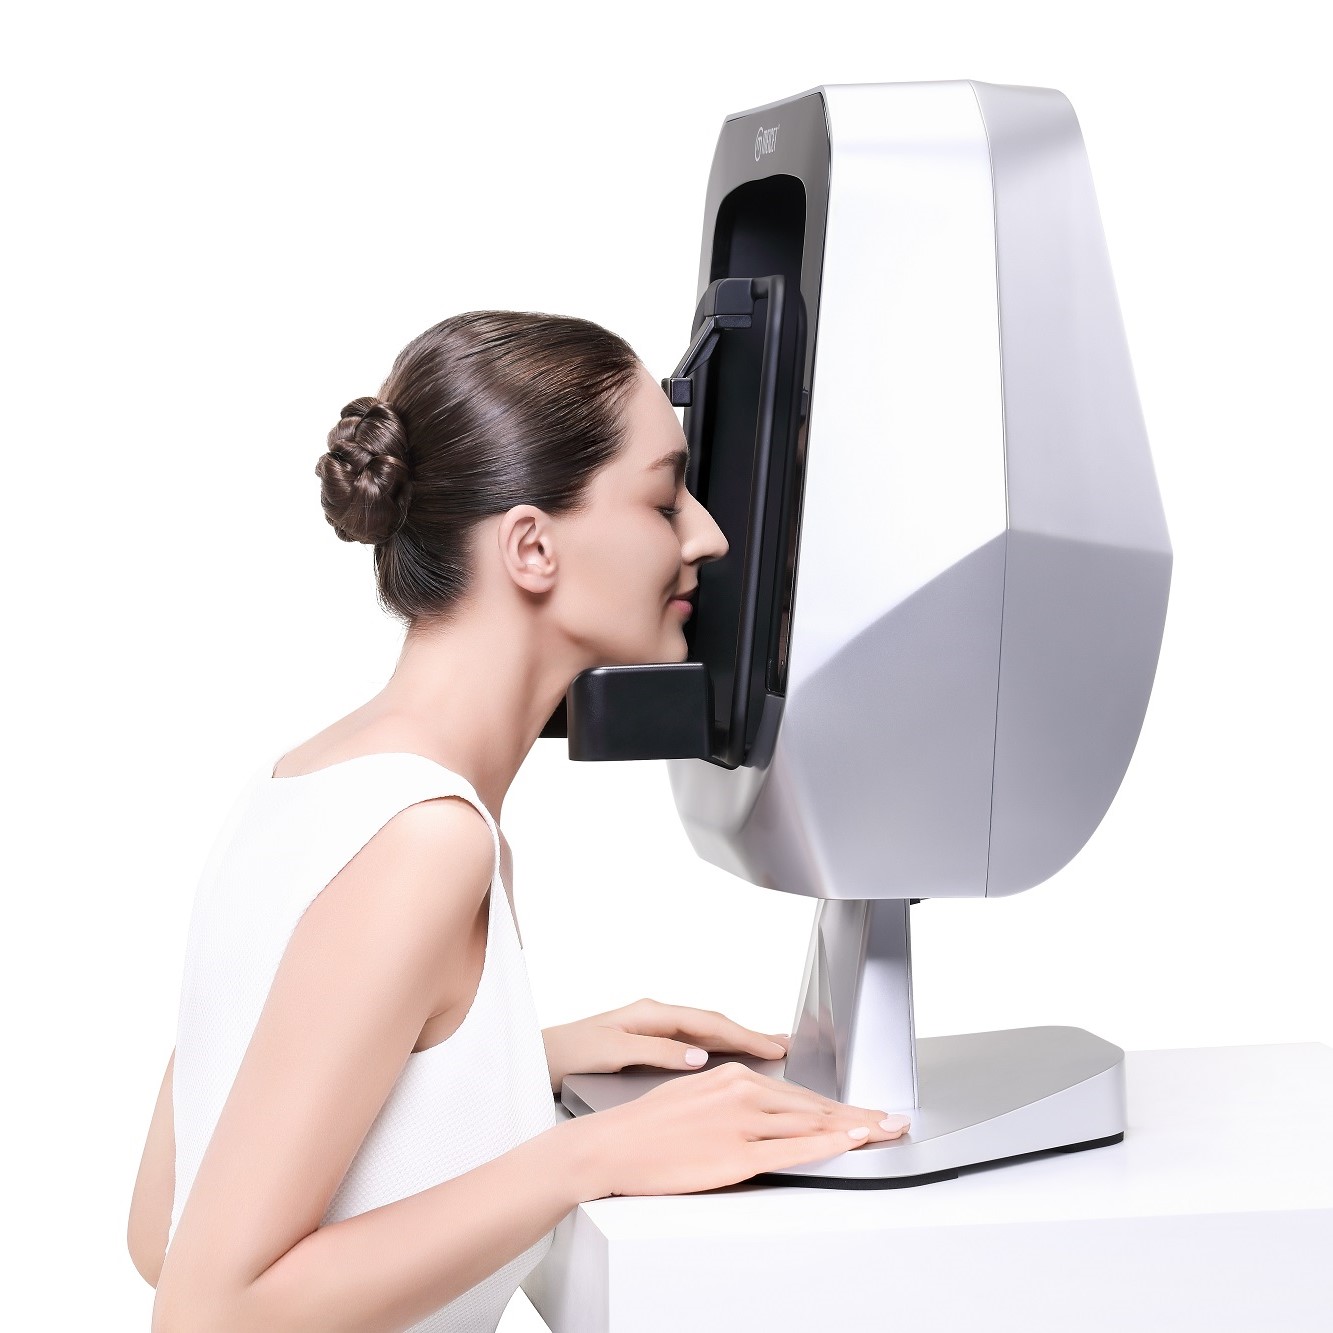 Meicet 3D Full Facial Skin Analyzer Commercial Use MC88 Featured Image